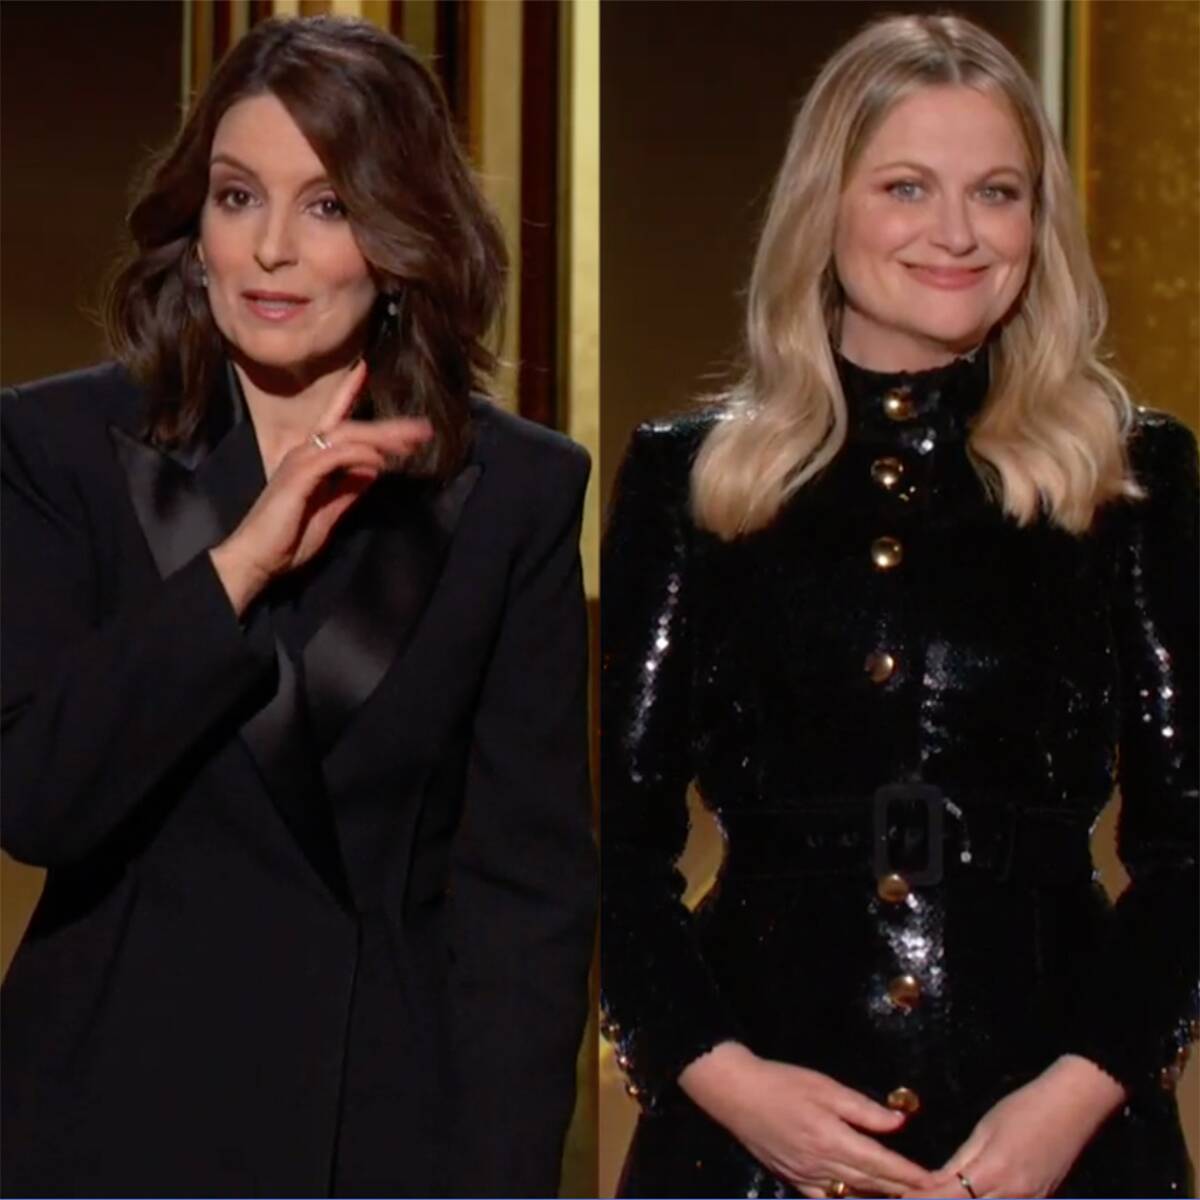 Tina Fey and Amy Poehler Call the Golden Globe Nominees "Flashy Garbage" in No-Holds-Barred Monologue